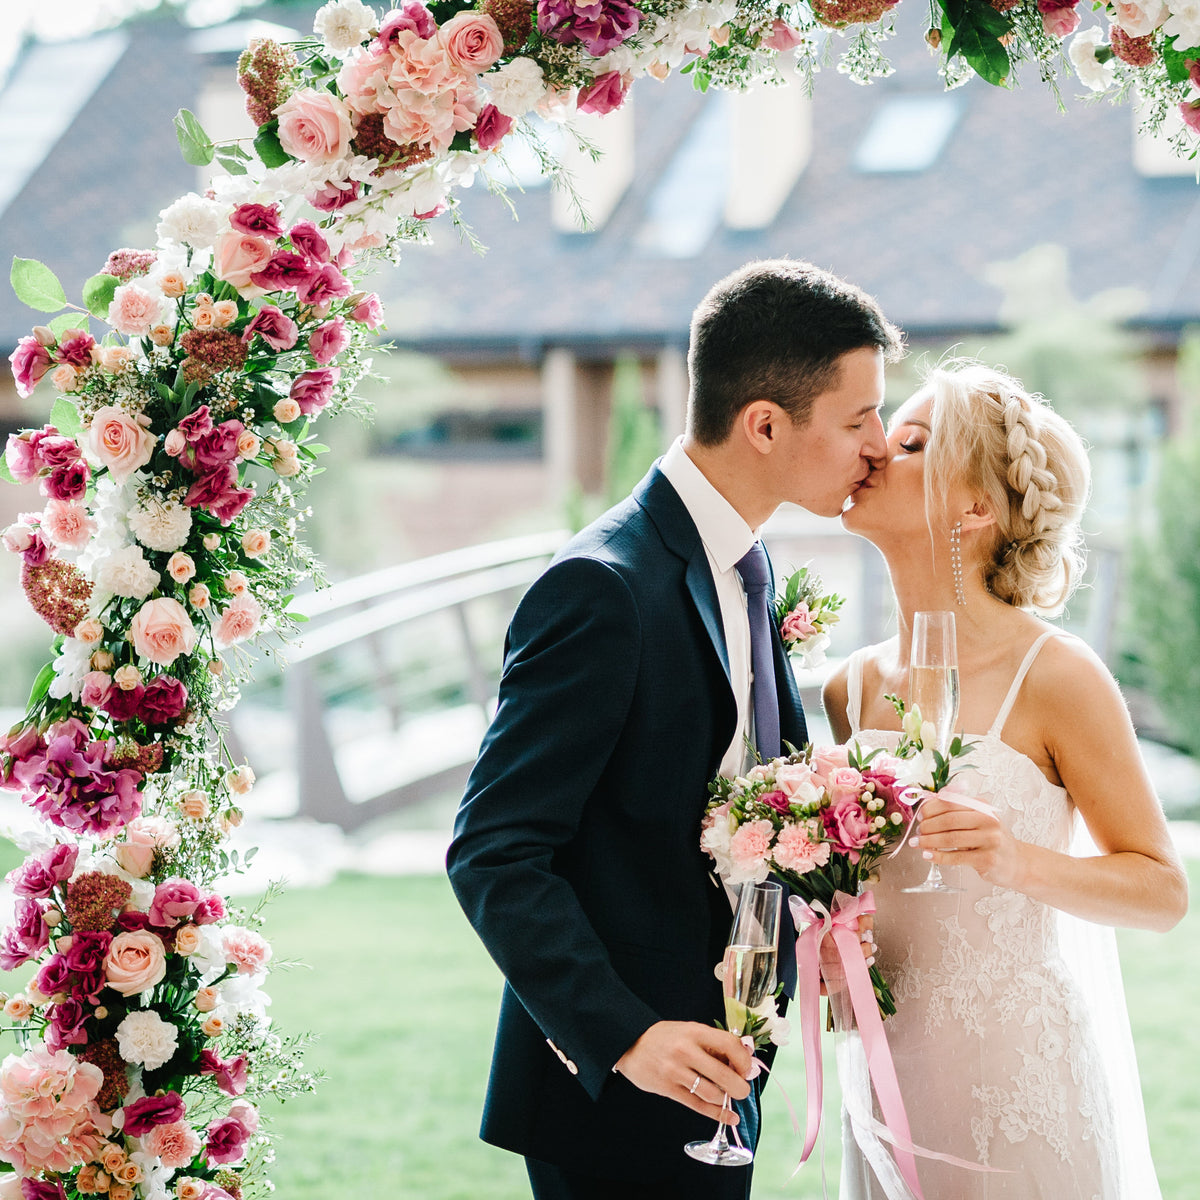 Enchanting Blossoms: The Art and Value of Flower Arrangements in Nuptials